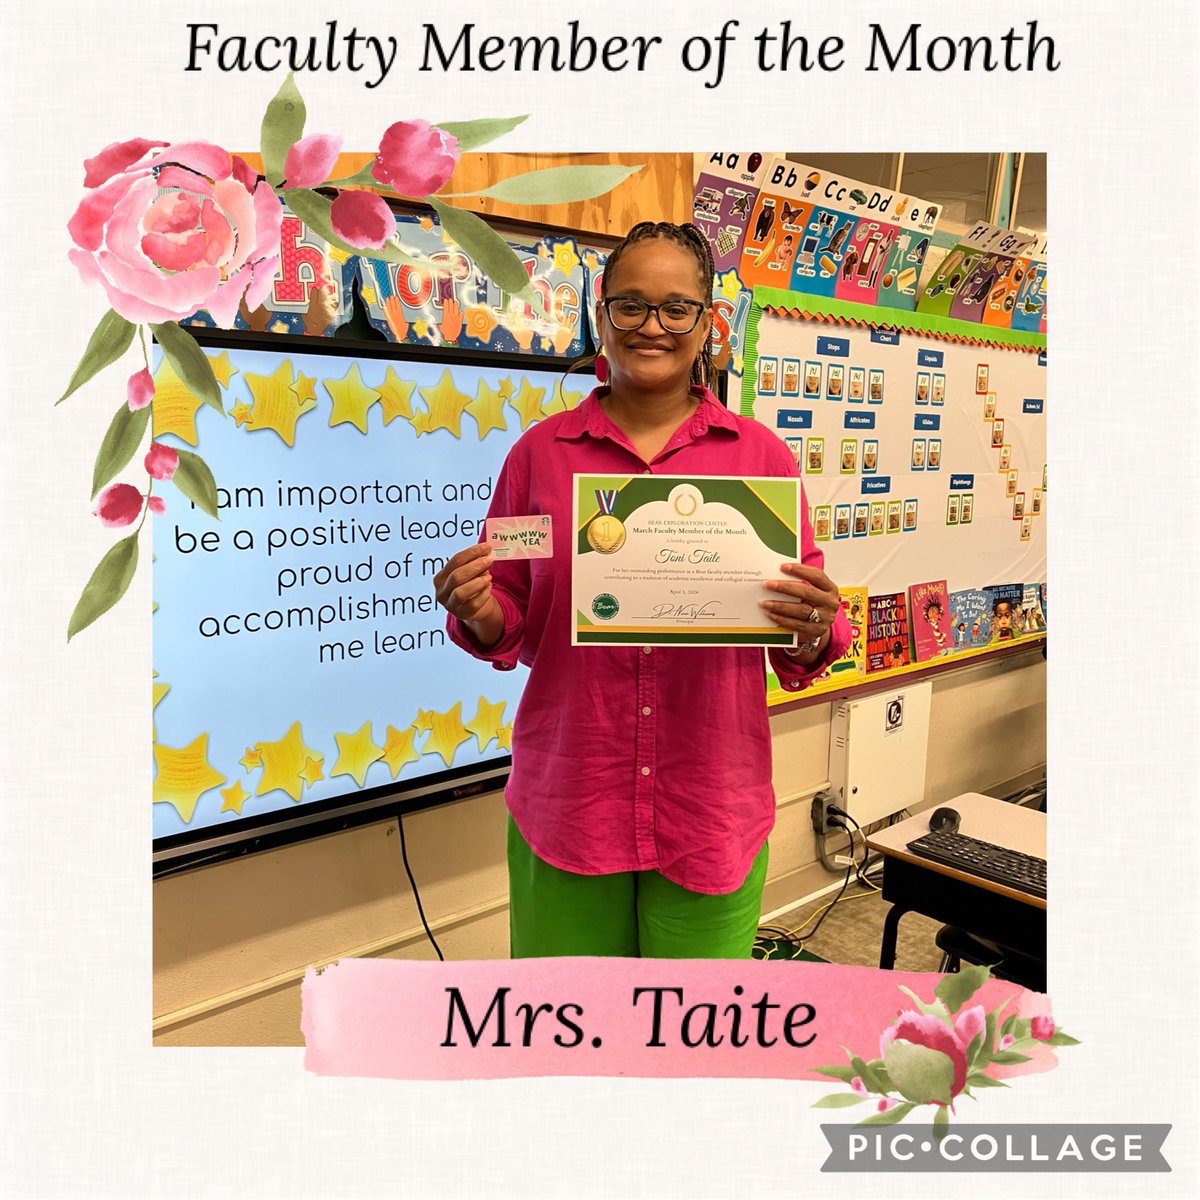 Congratulations, Mrs. Taite for blooming 💐bright during the during the month #March. #BearCares #FacultyMemberoftheMonth